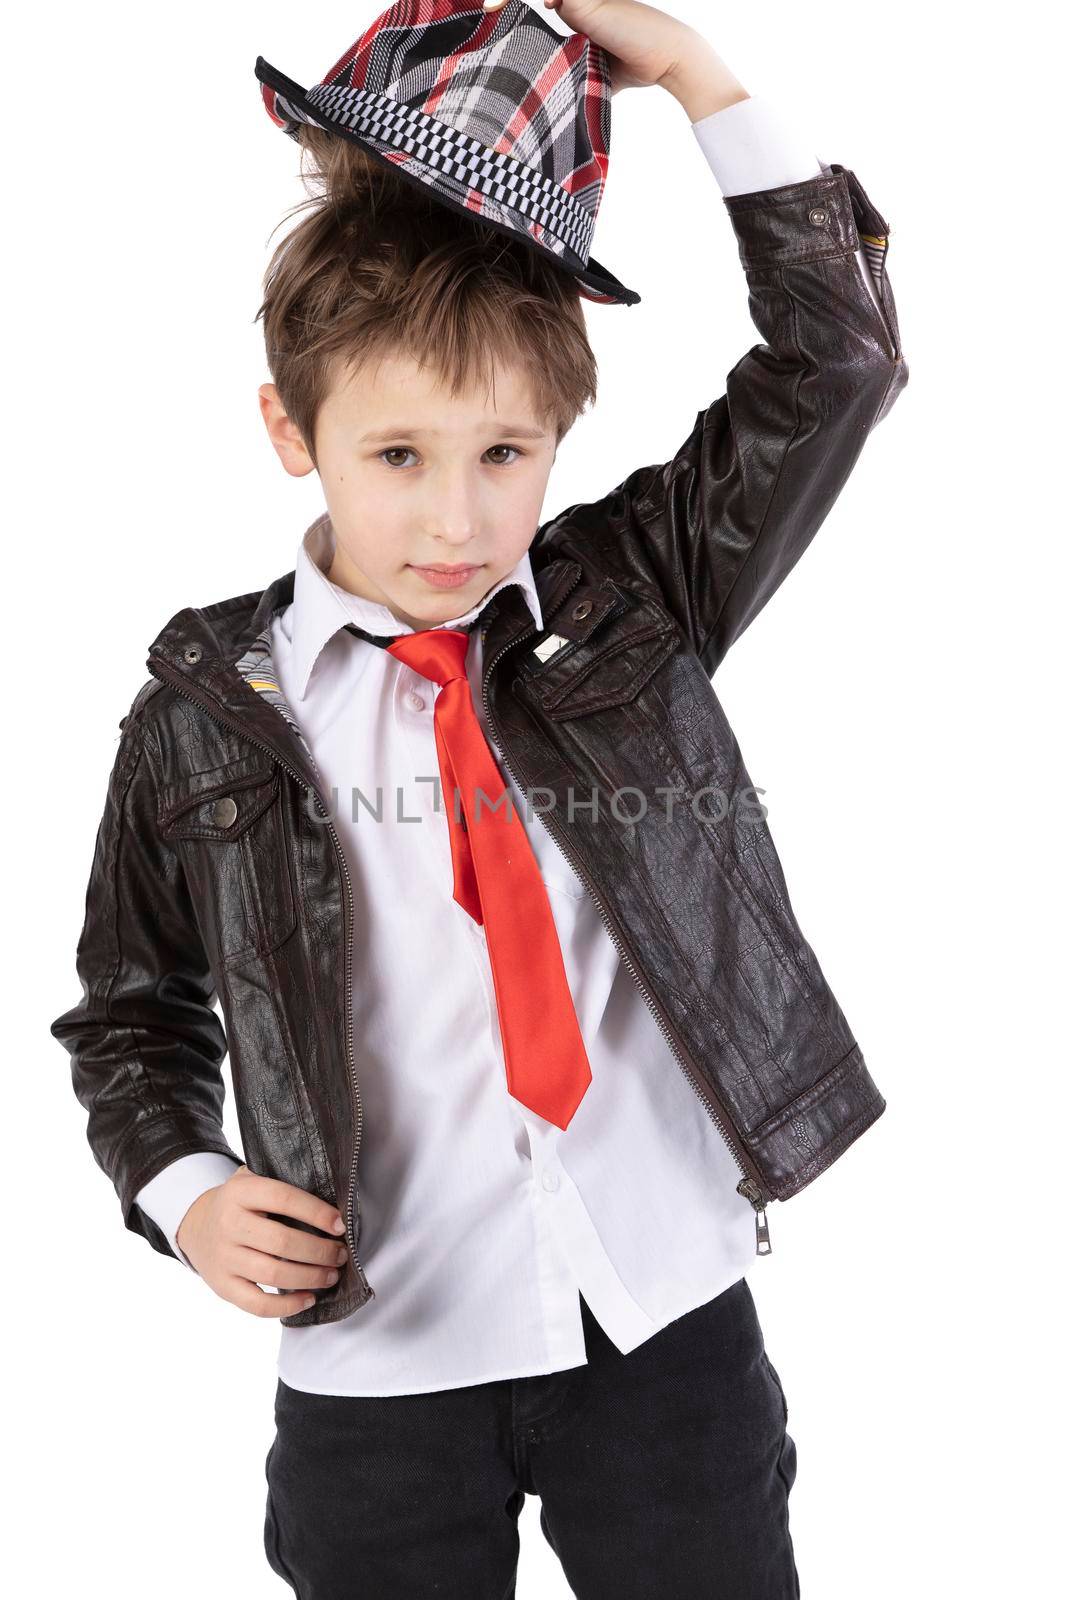 Funny little boy in a leather jacket, elegant hat and red tie. Red child on a white background. Seven year old boy. Take off your hat.